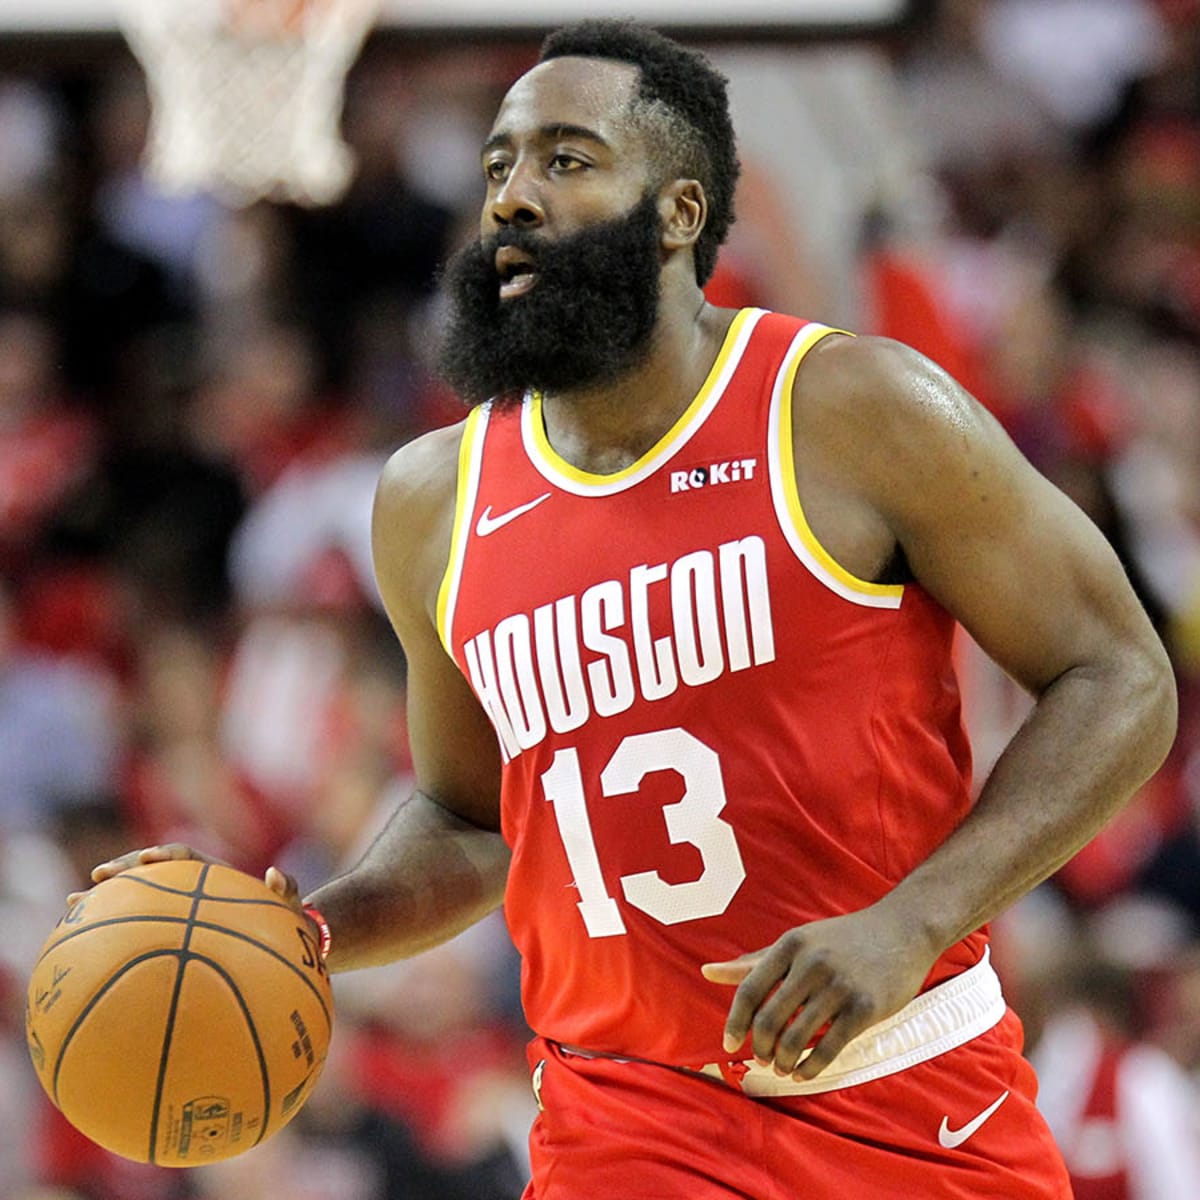 Rockets guard James Harden has found a place to excel, show strengths in  Houston